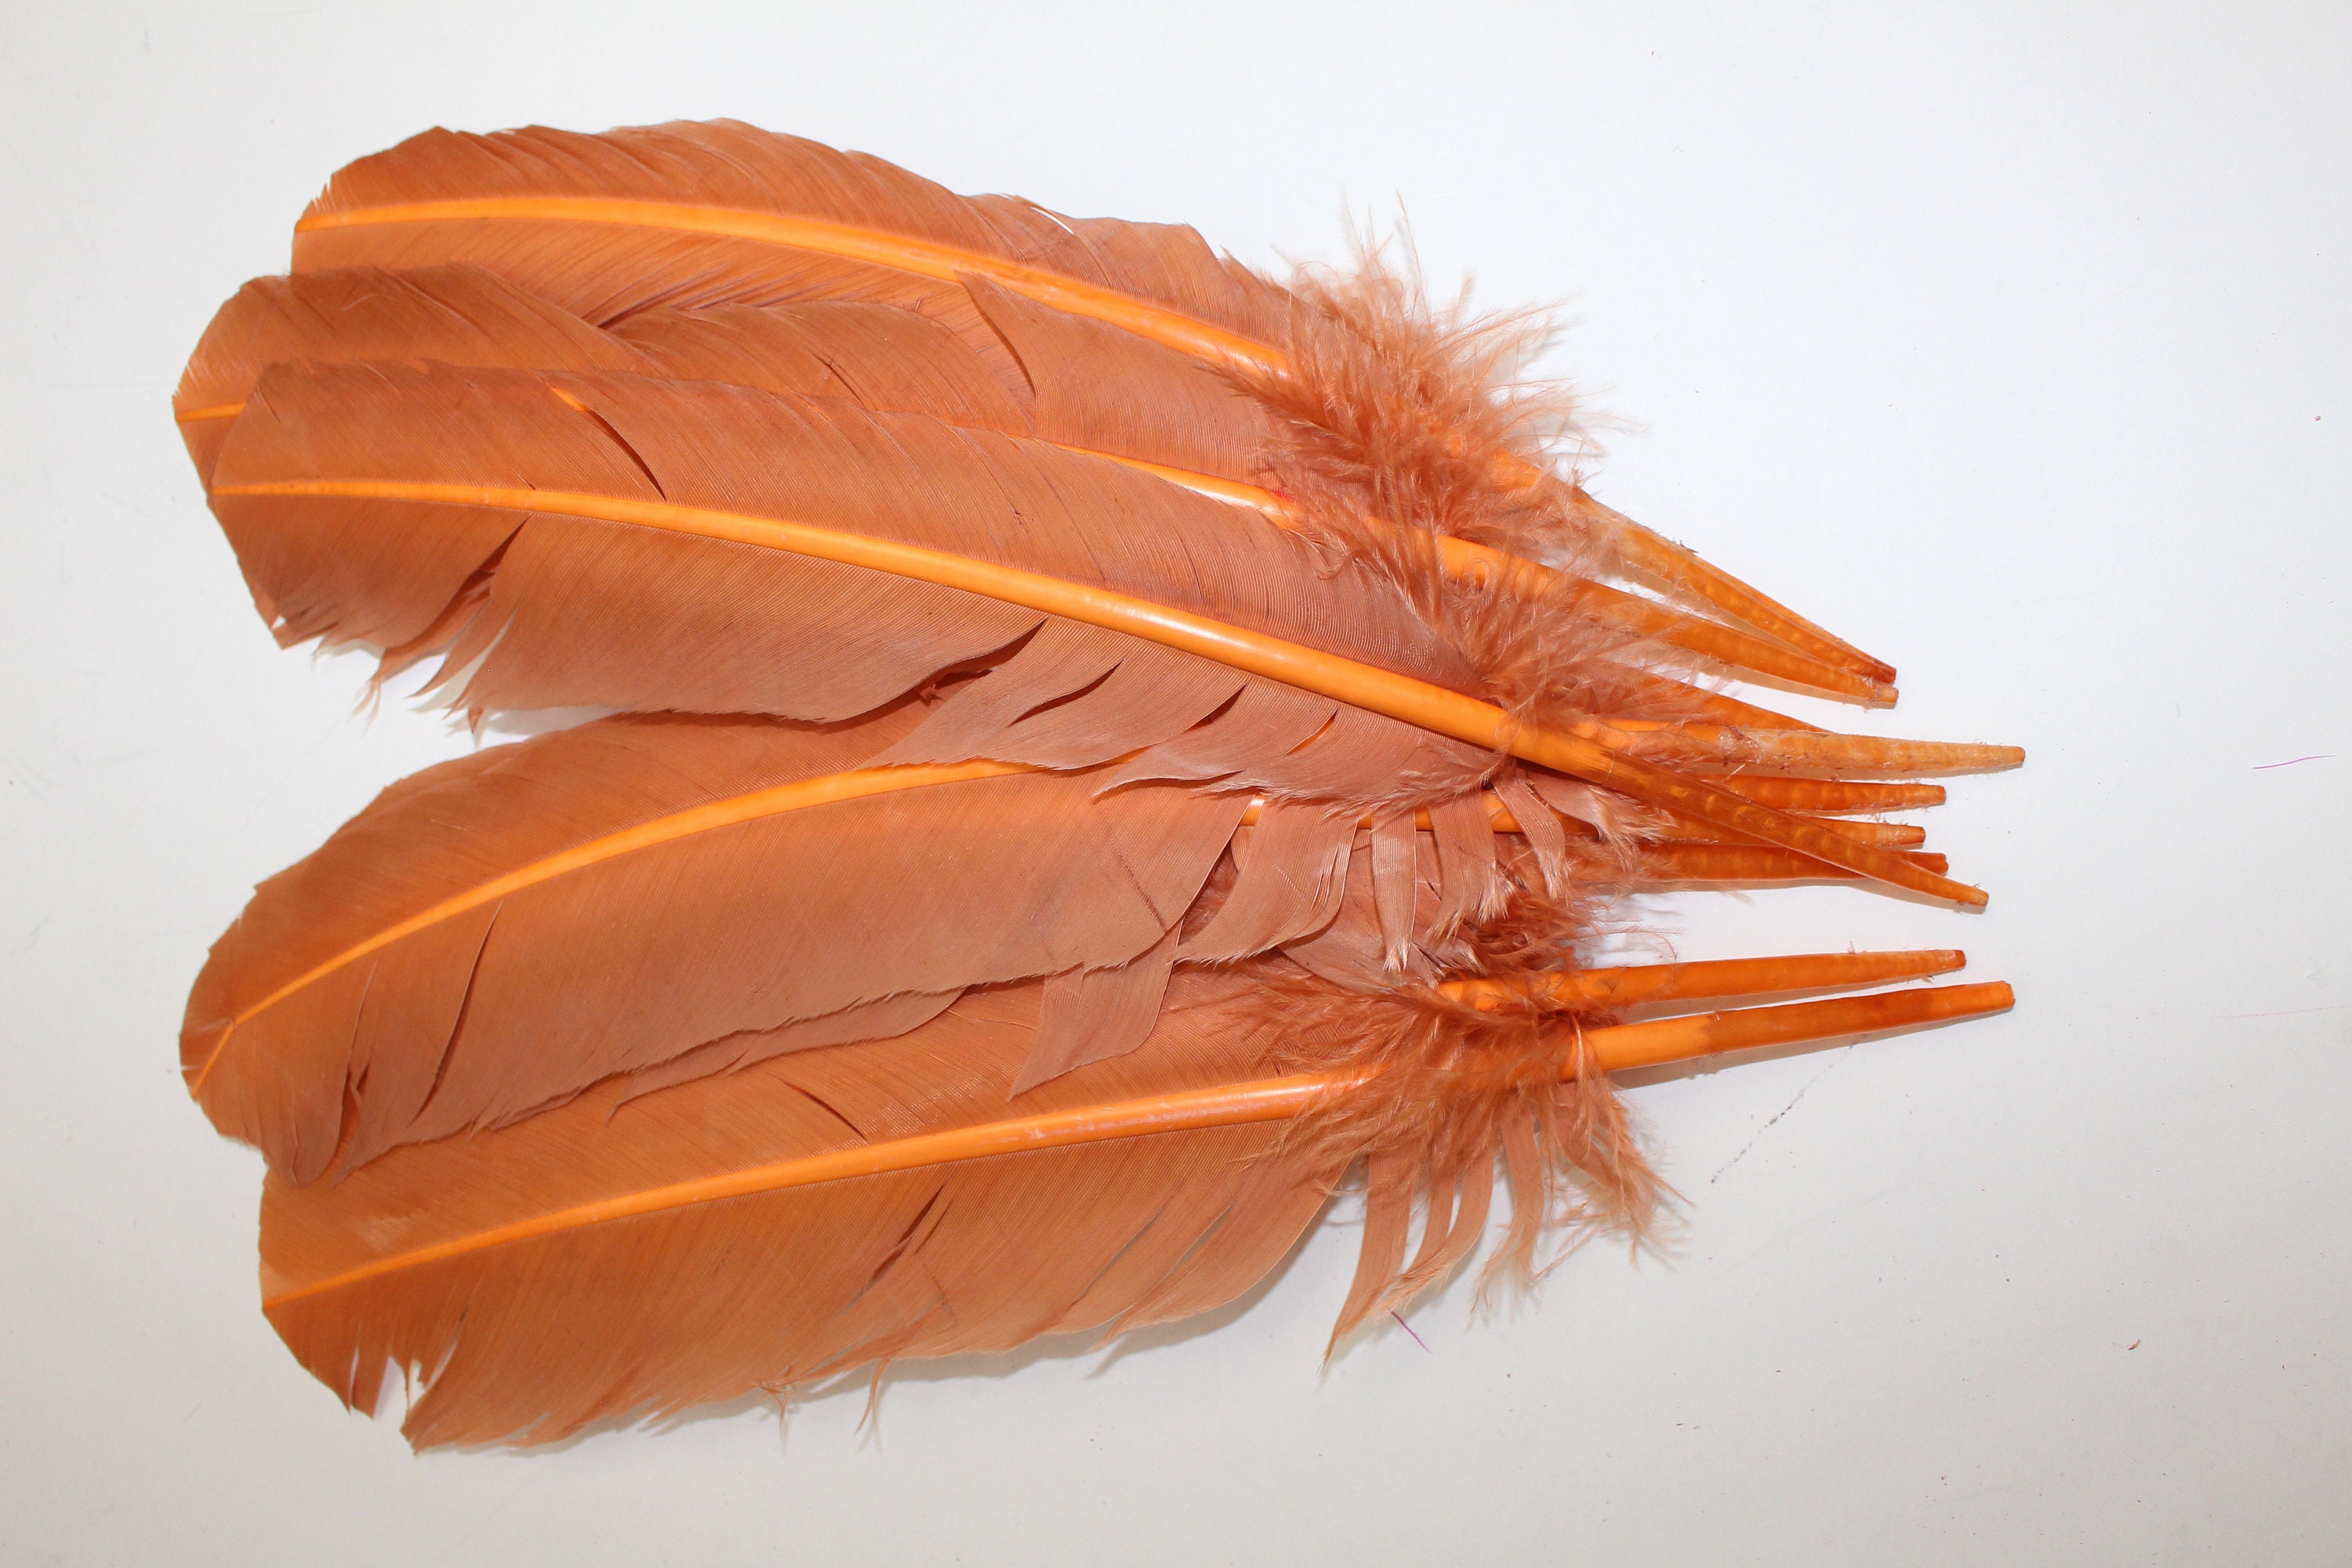 Buy 20 Pcs White 10-12 Inch Turkey Quill Feathers, Primary Wing Quill Large  Feathers Craft Costume, Wholesale Feather Supplier Online in India 